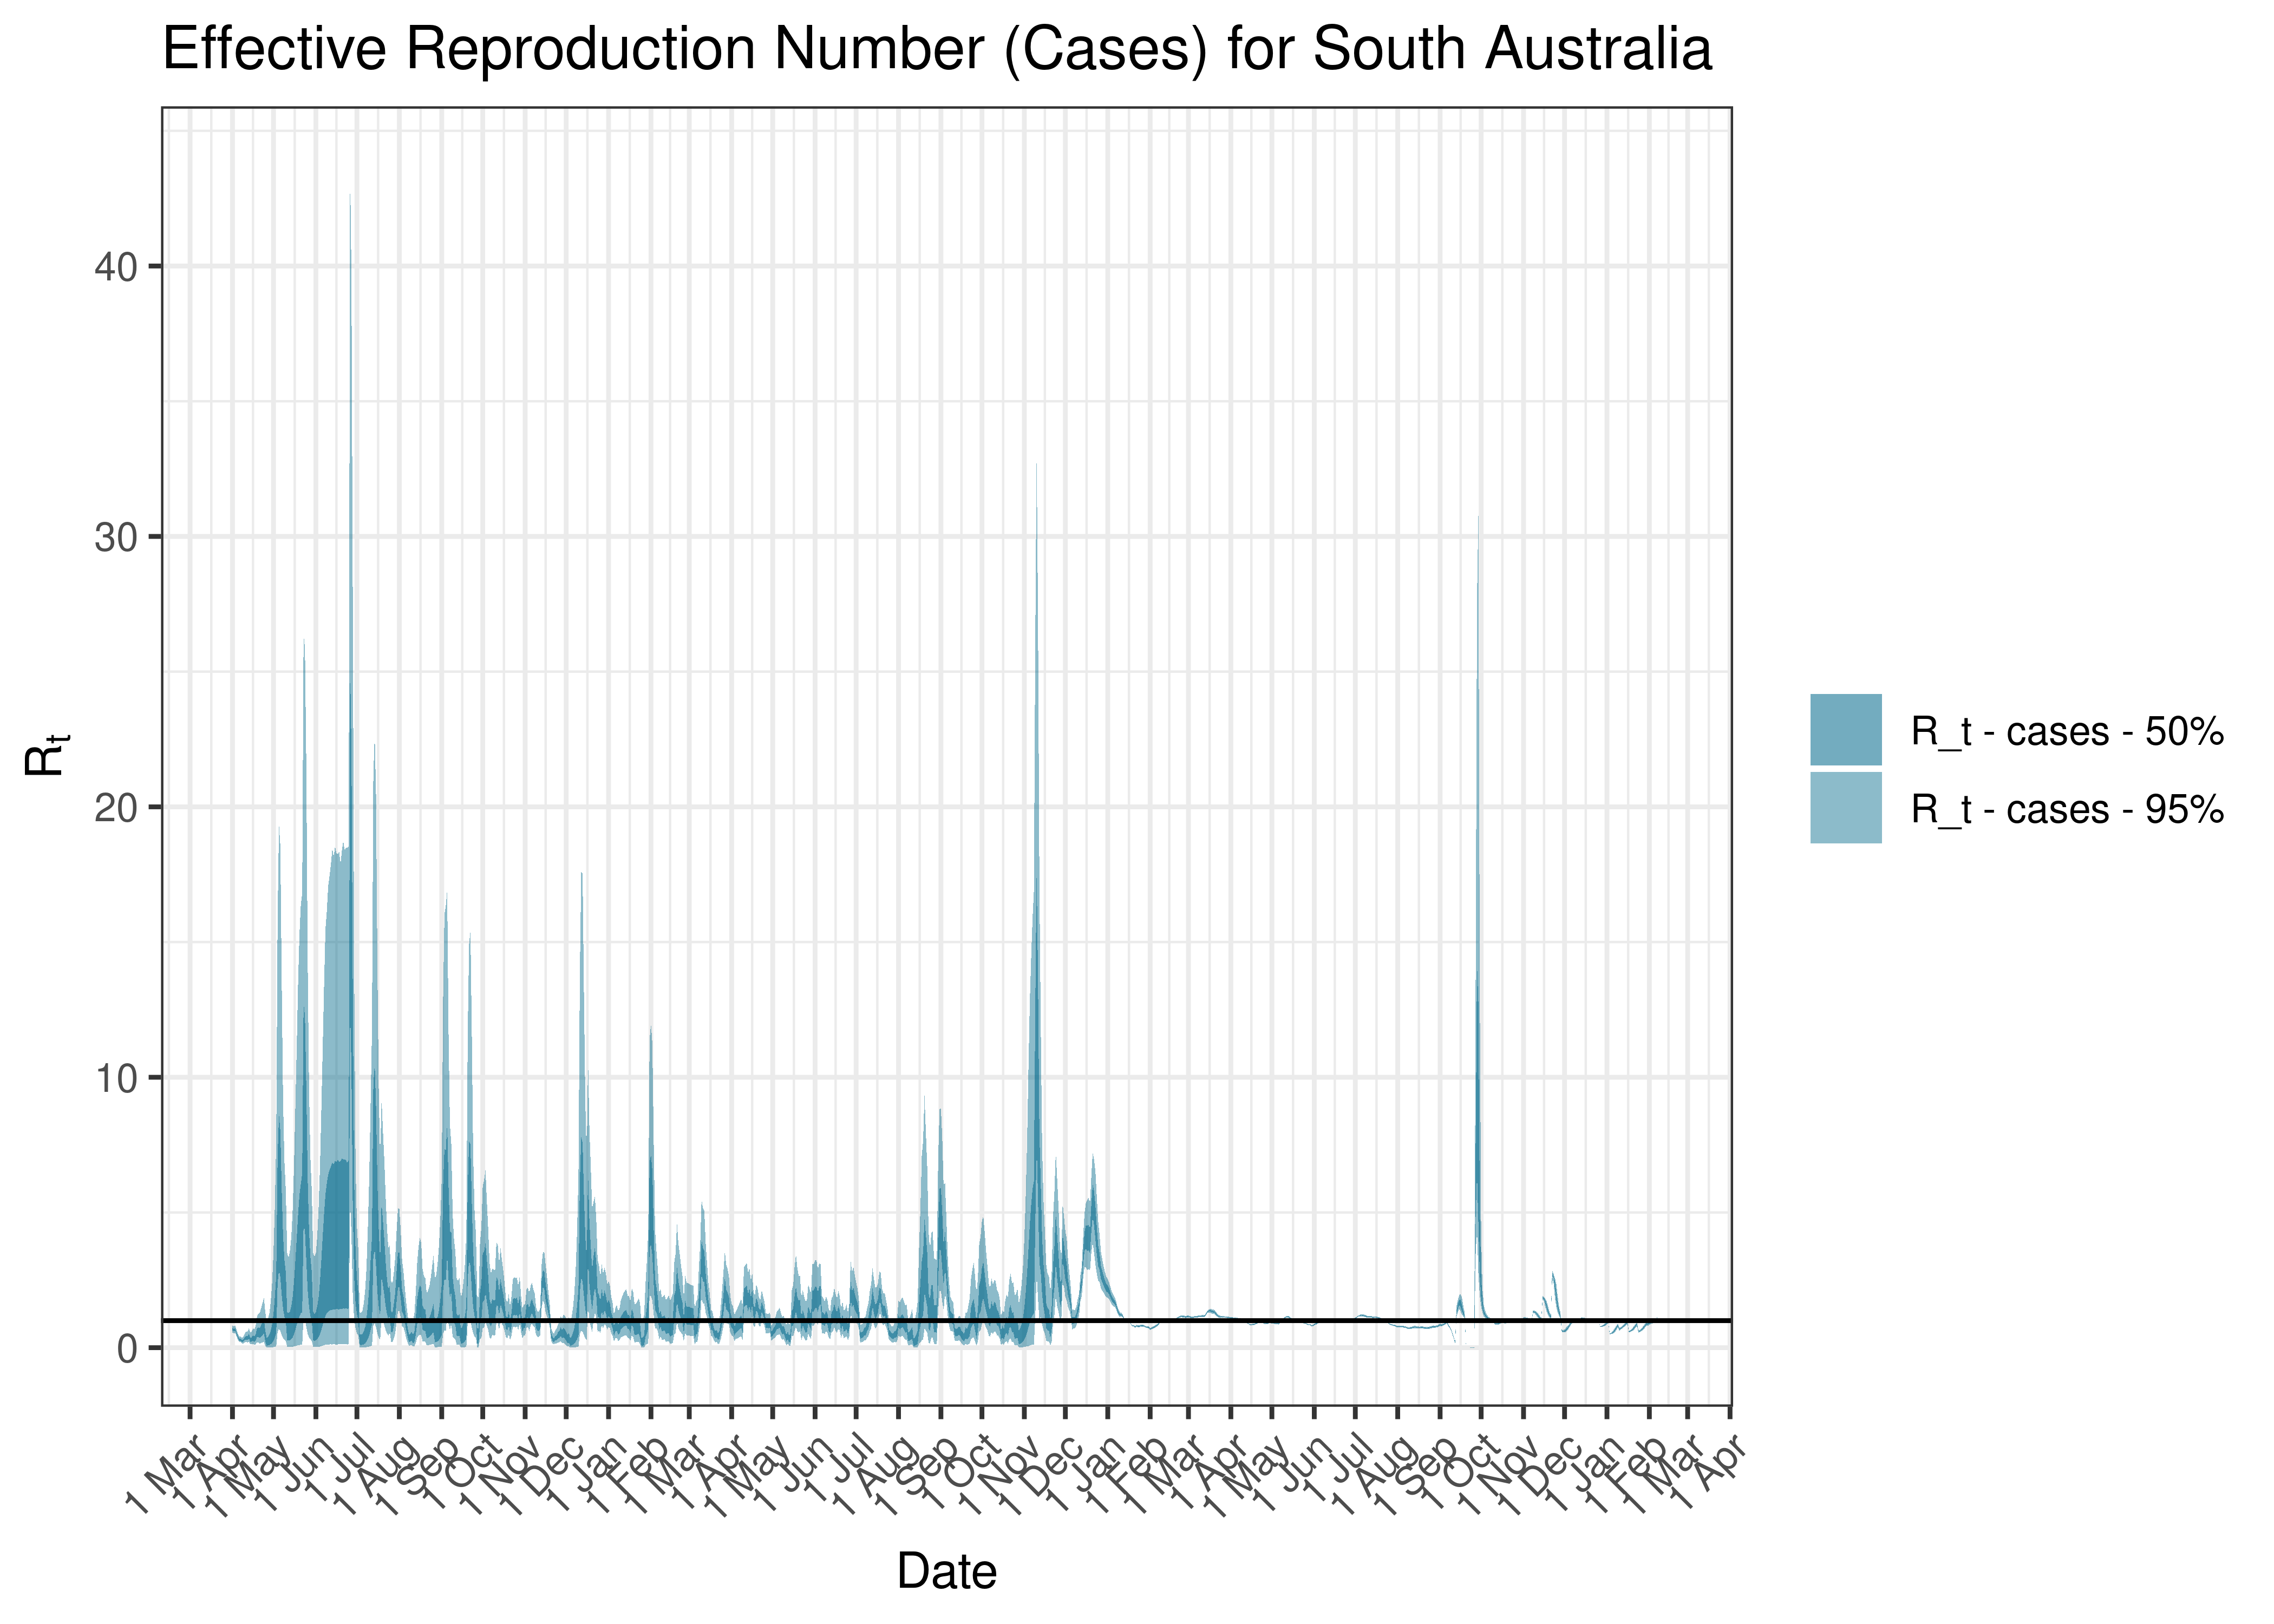 Estimated Effective Reproduction Number Based on Cases for South Australia since 1 April 2020